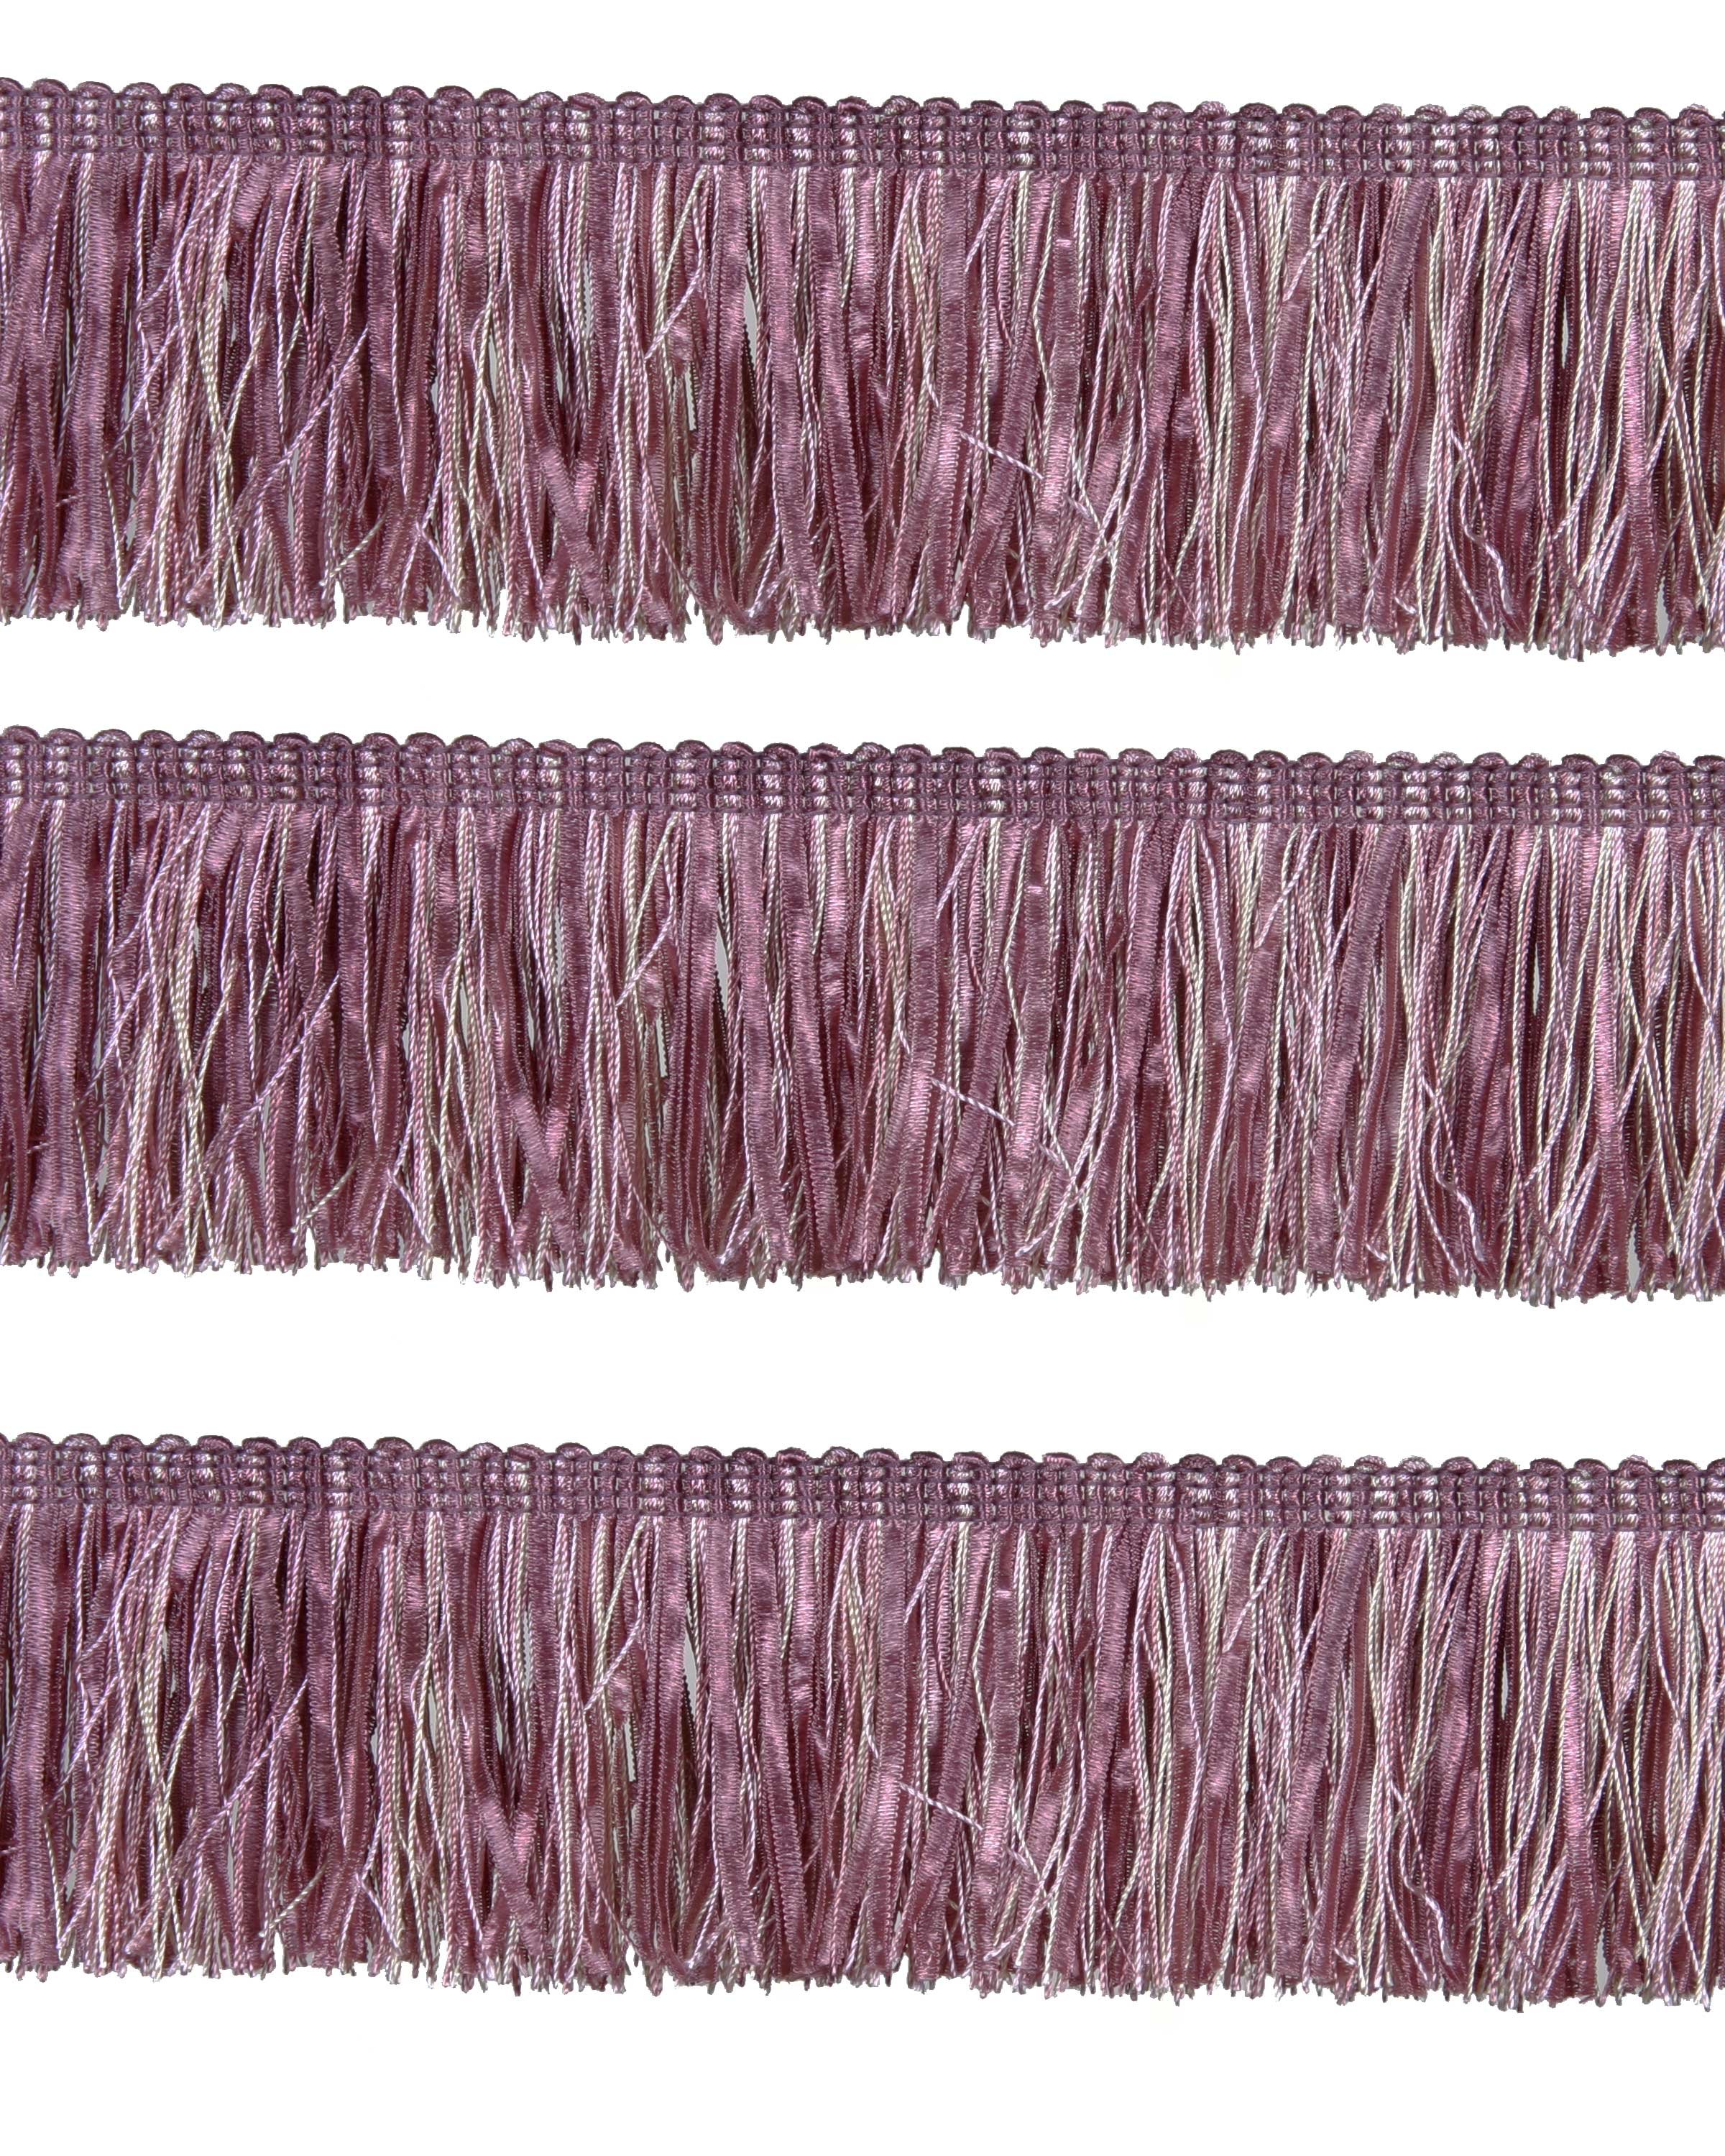 Bullion Fringe with Ribbons - Dusky Pink 60mm Price is for 5 metres